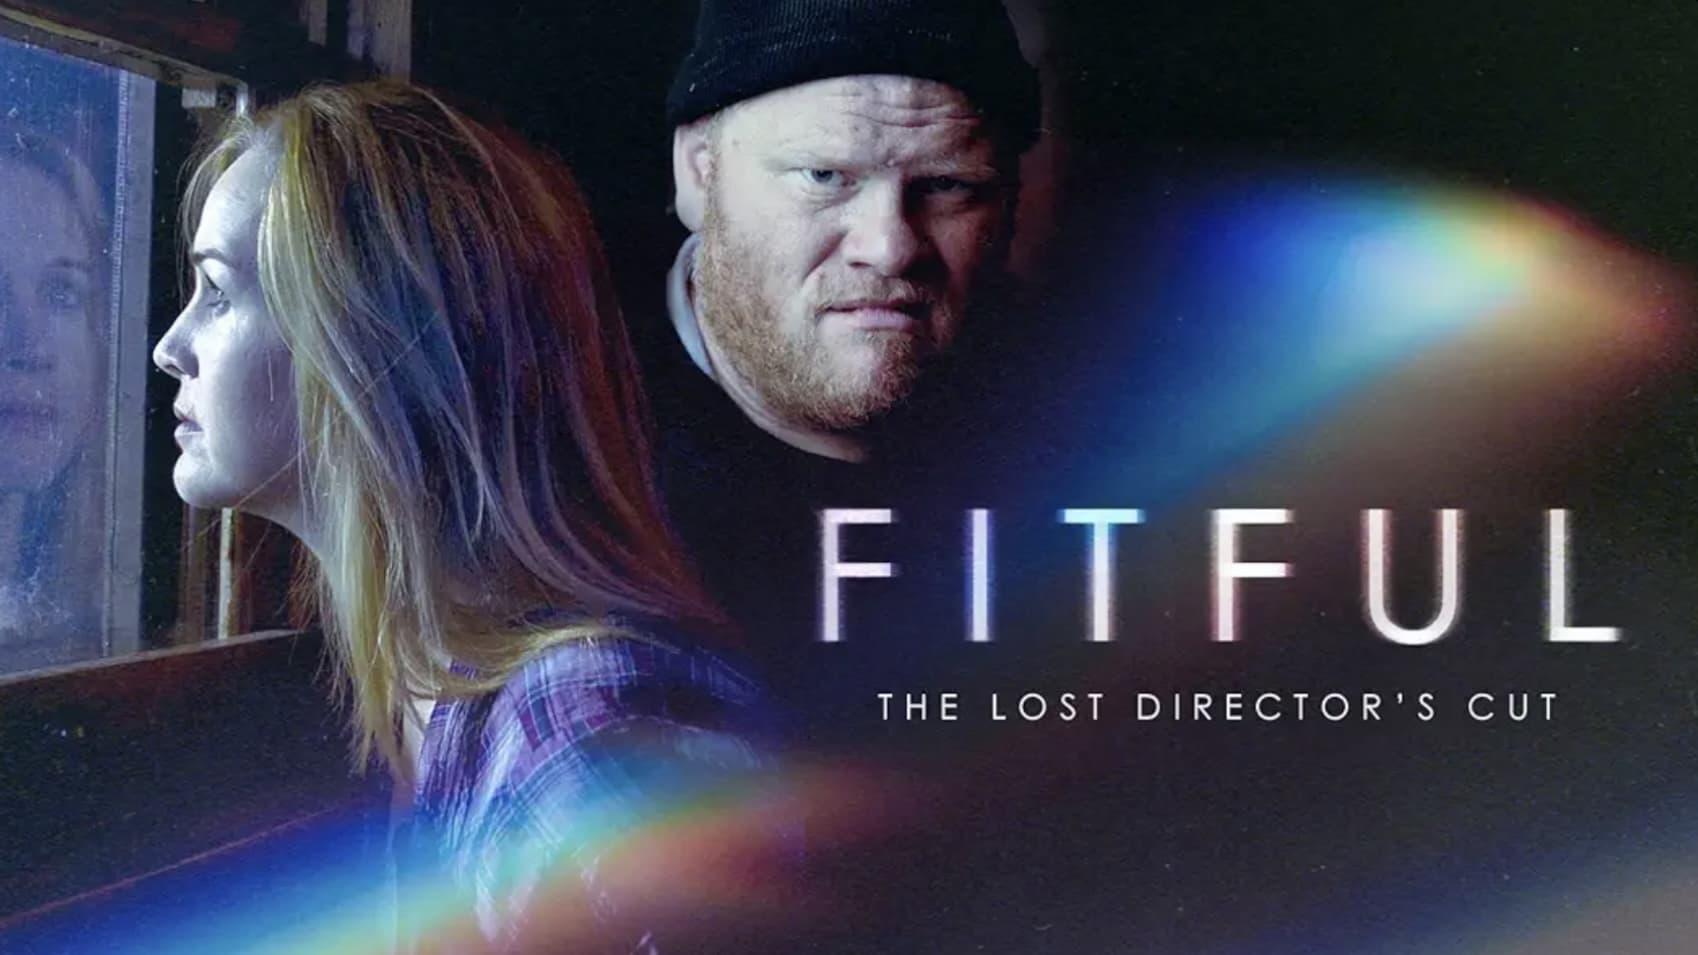 Fitful: The Lost Director's Cut backdrop